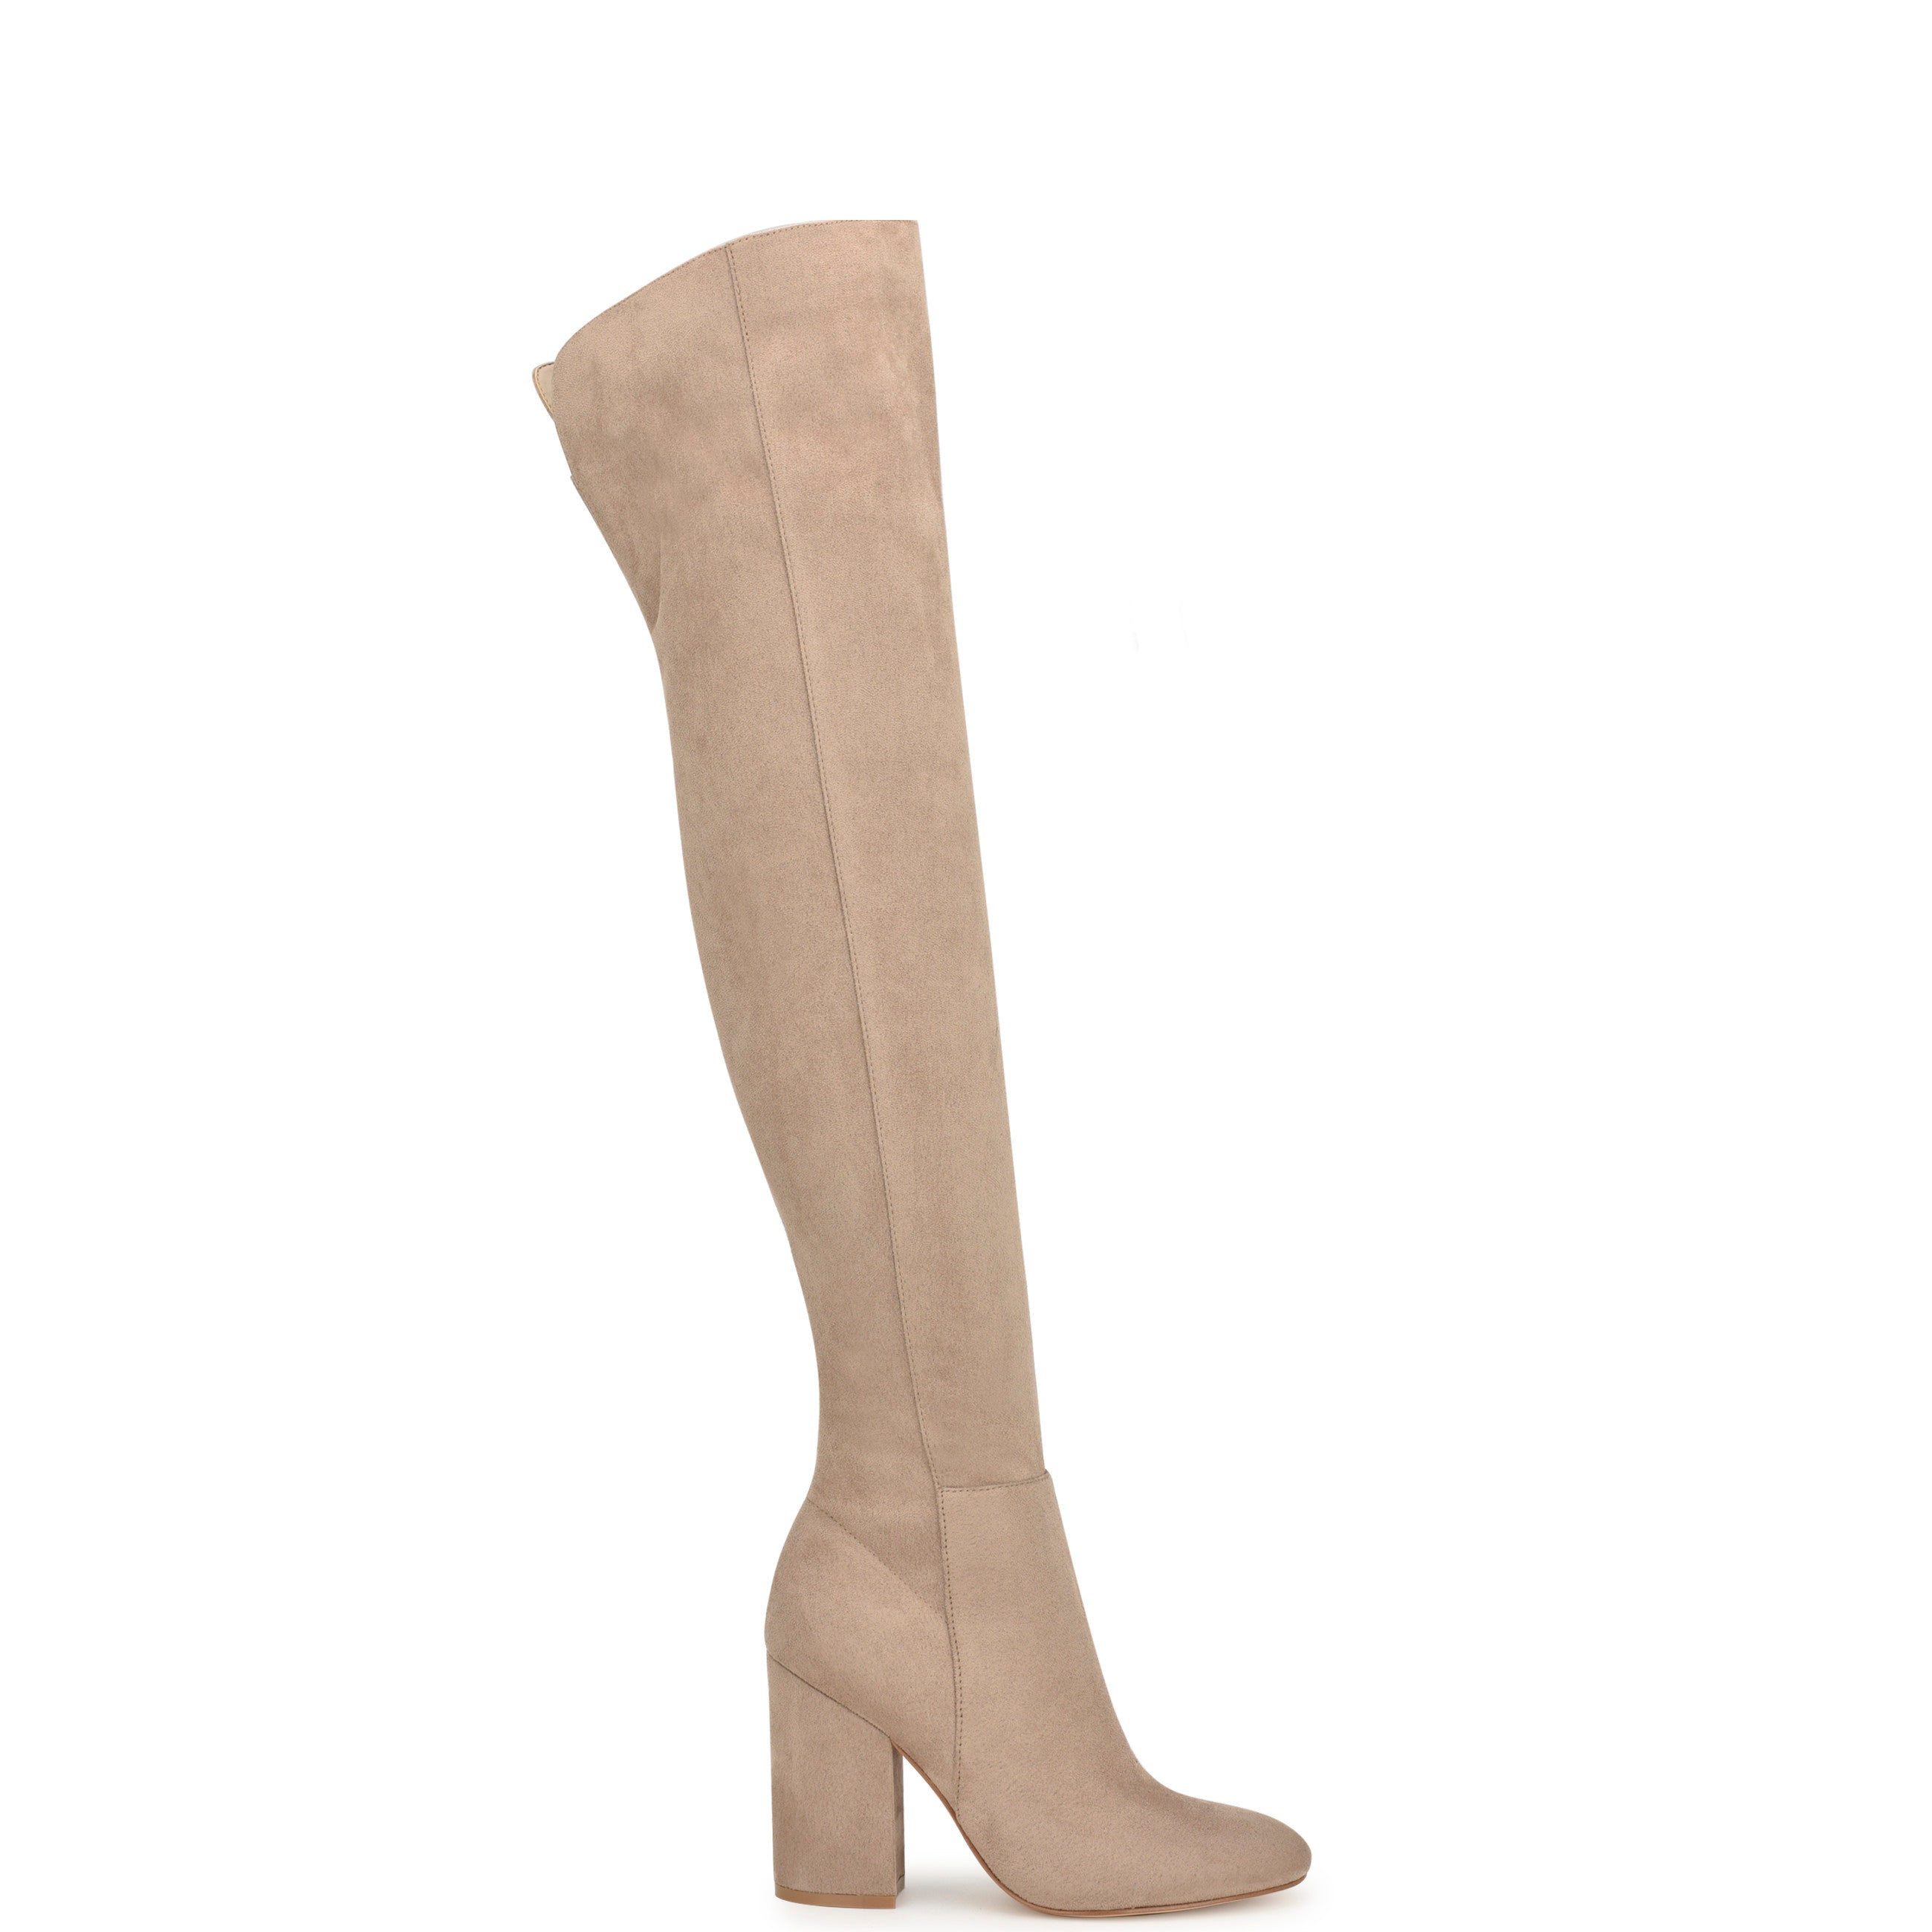 Tall Boots – Nine West